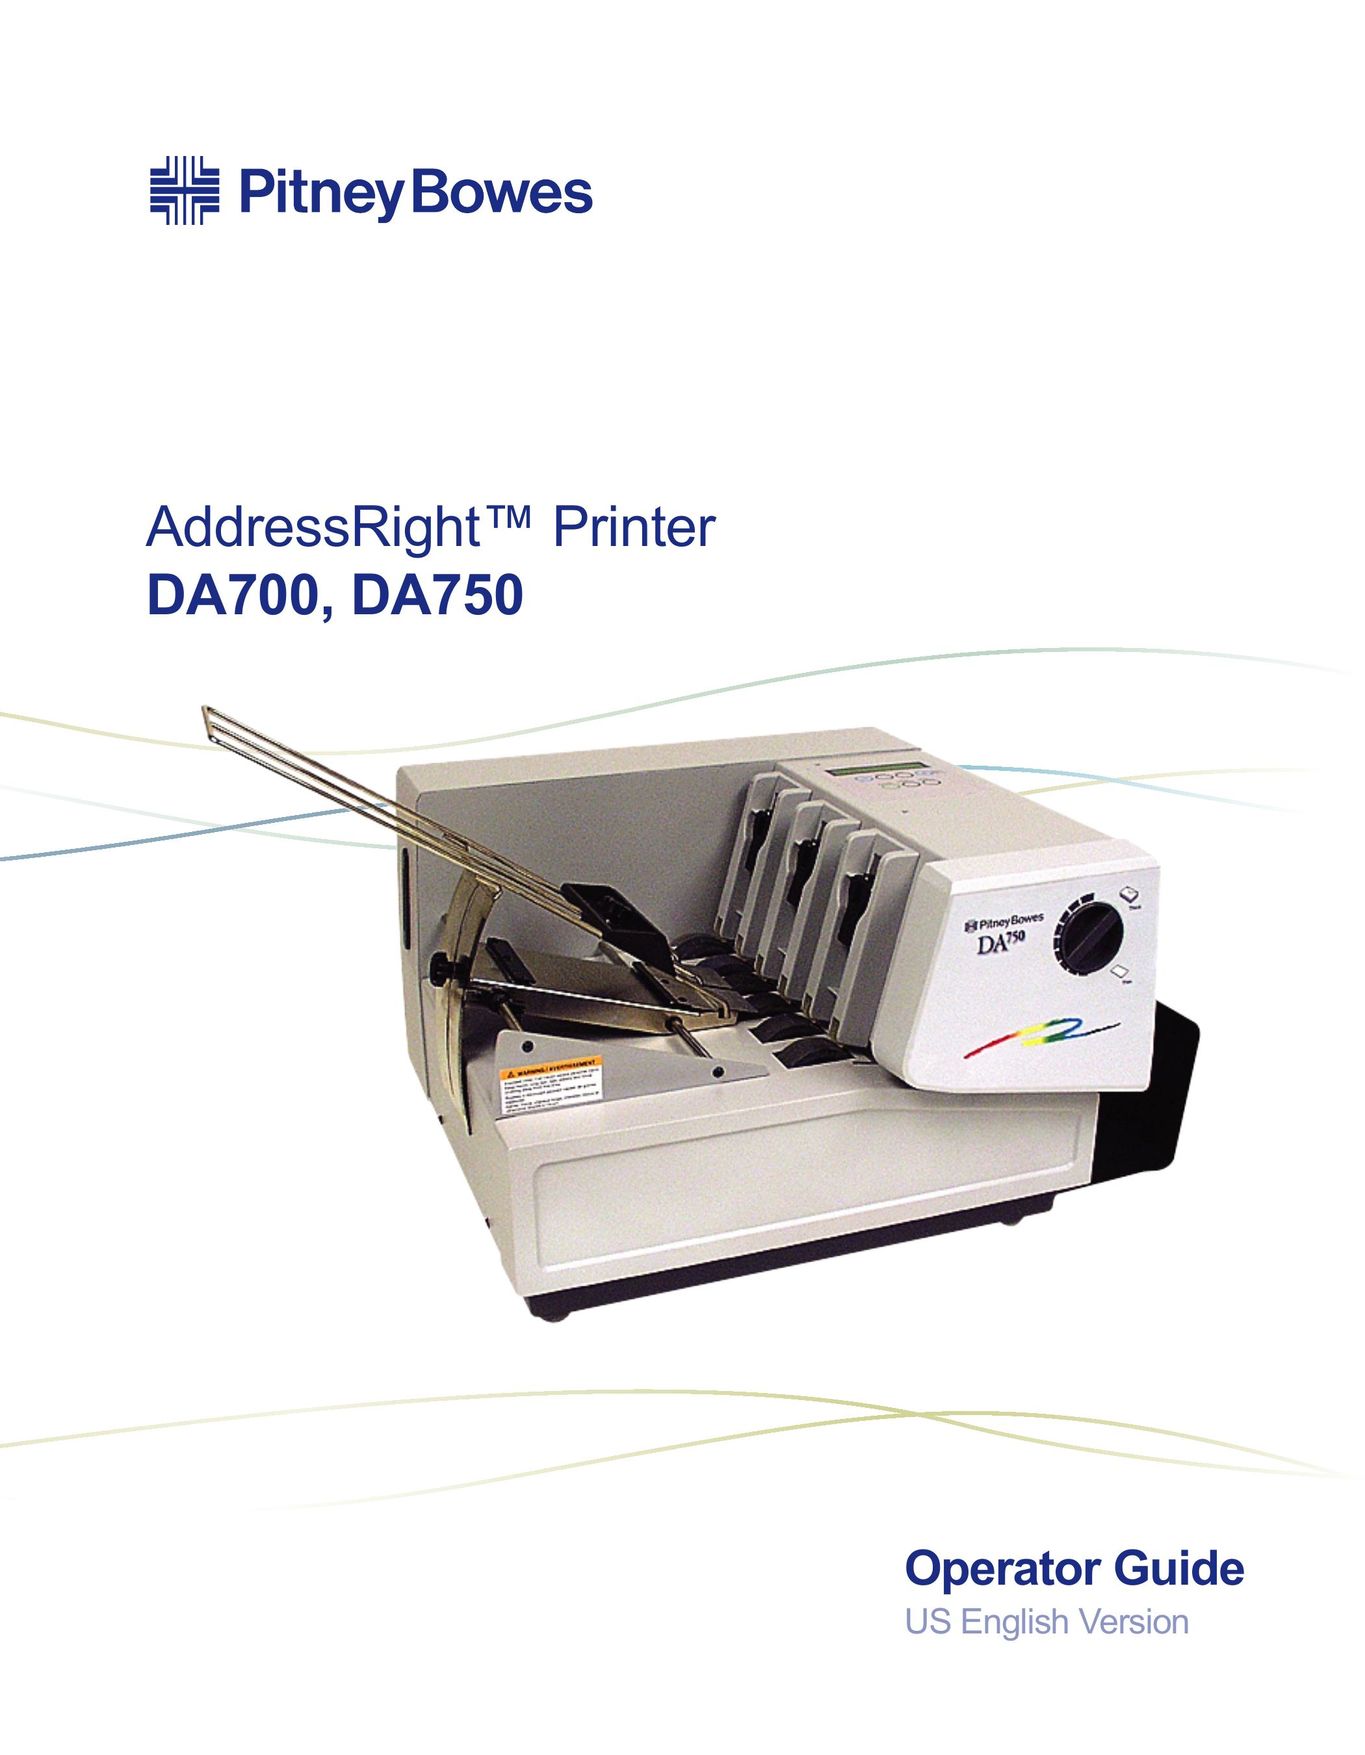 Pitney Bowes DA750 All in One Printer User Manual